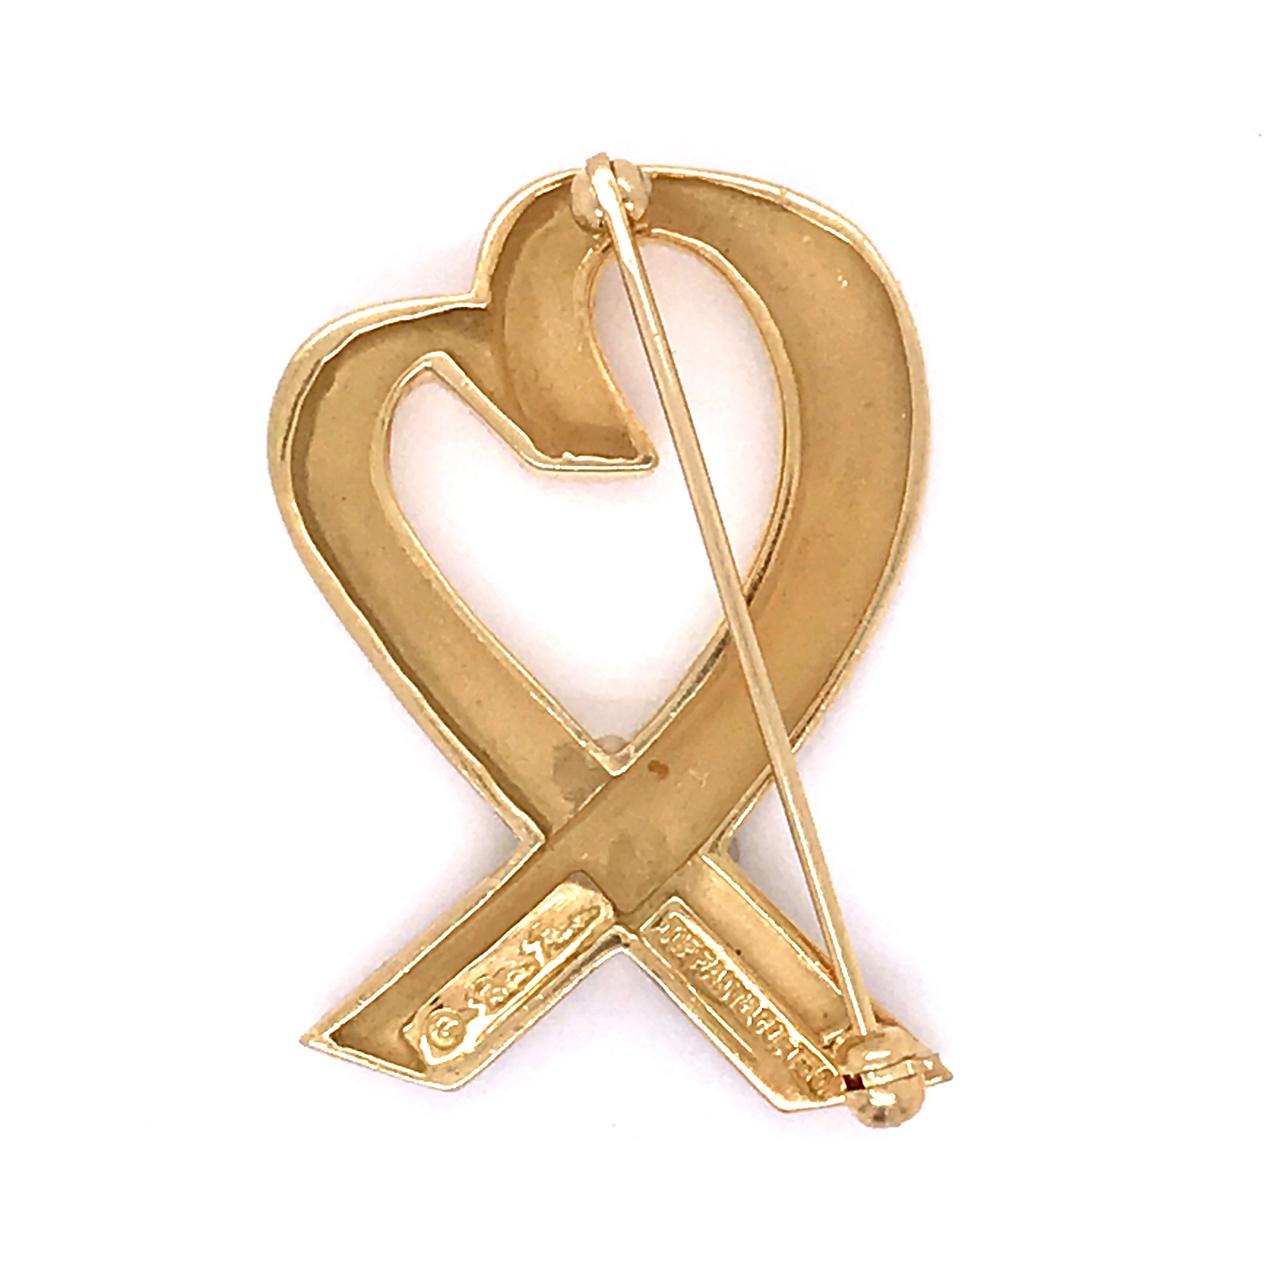 Tiffany & Co. 18 Karat Gold Paloma Picasso Loving Heart Brooch or Pin For Sale 2